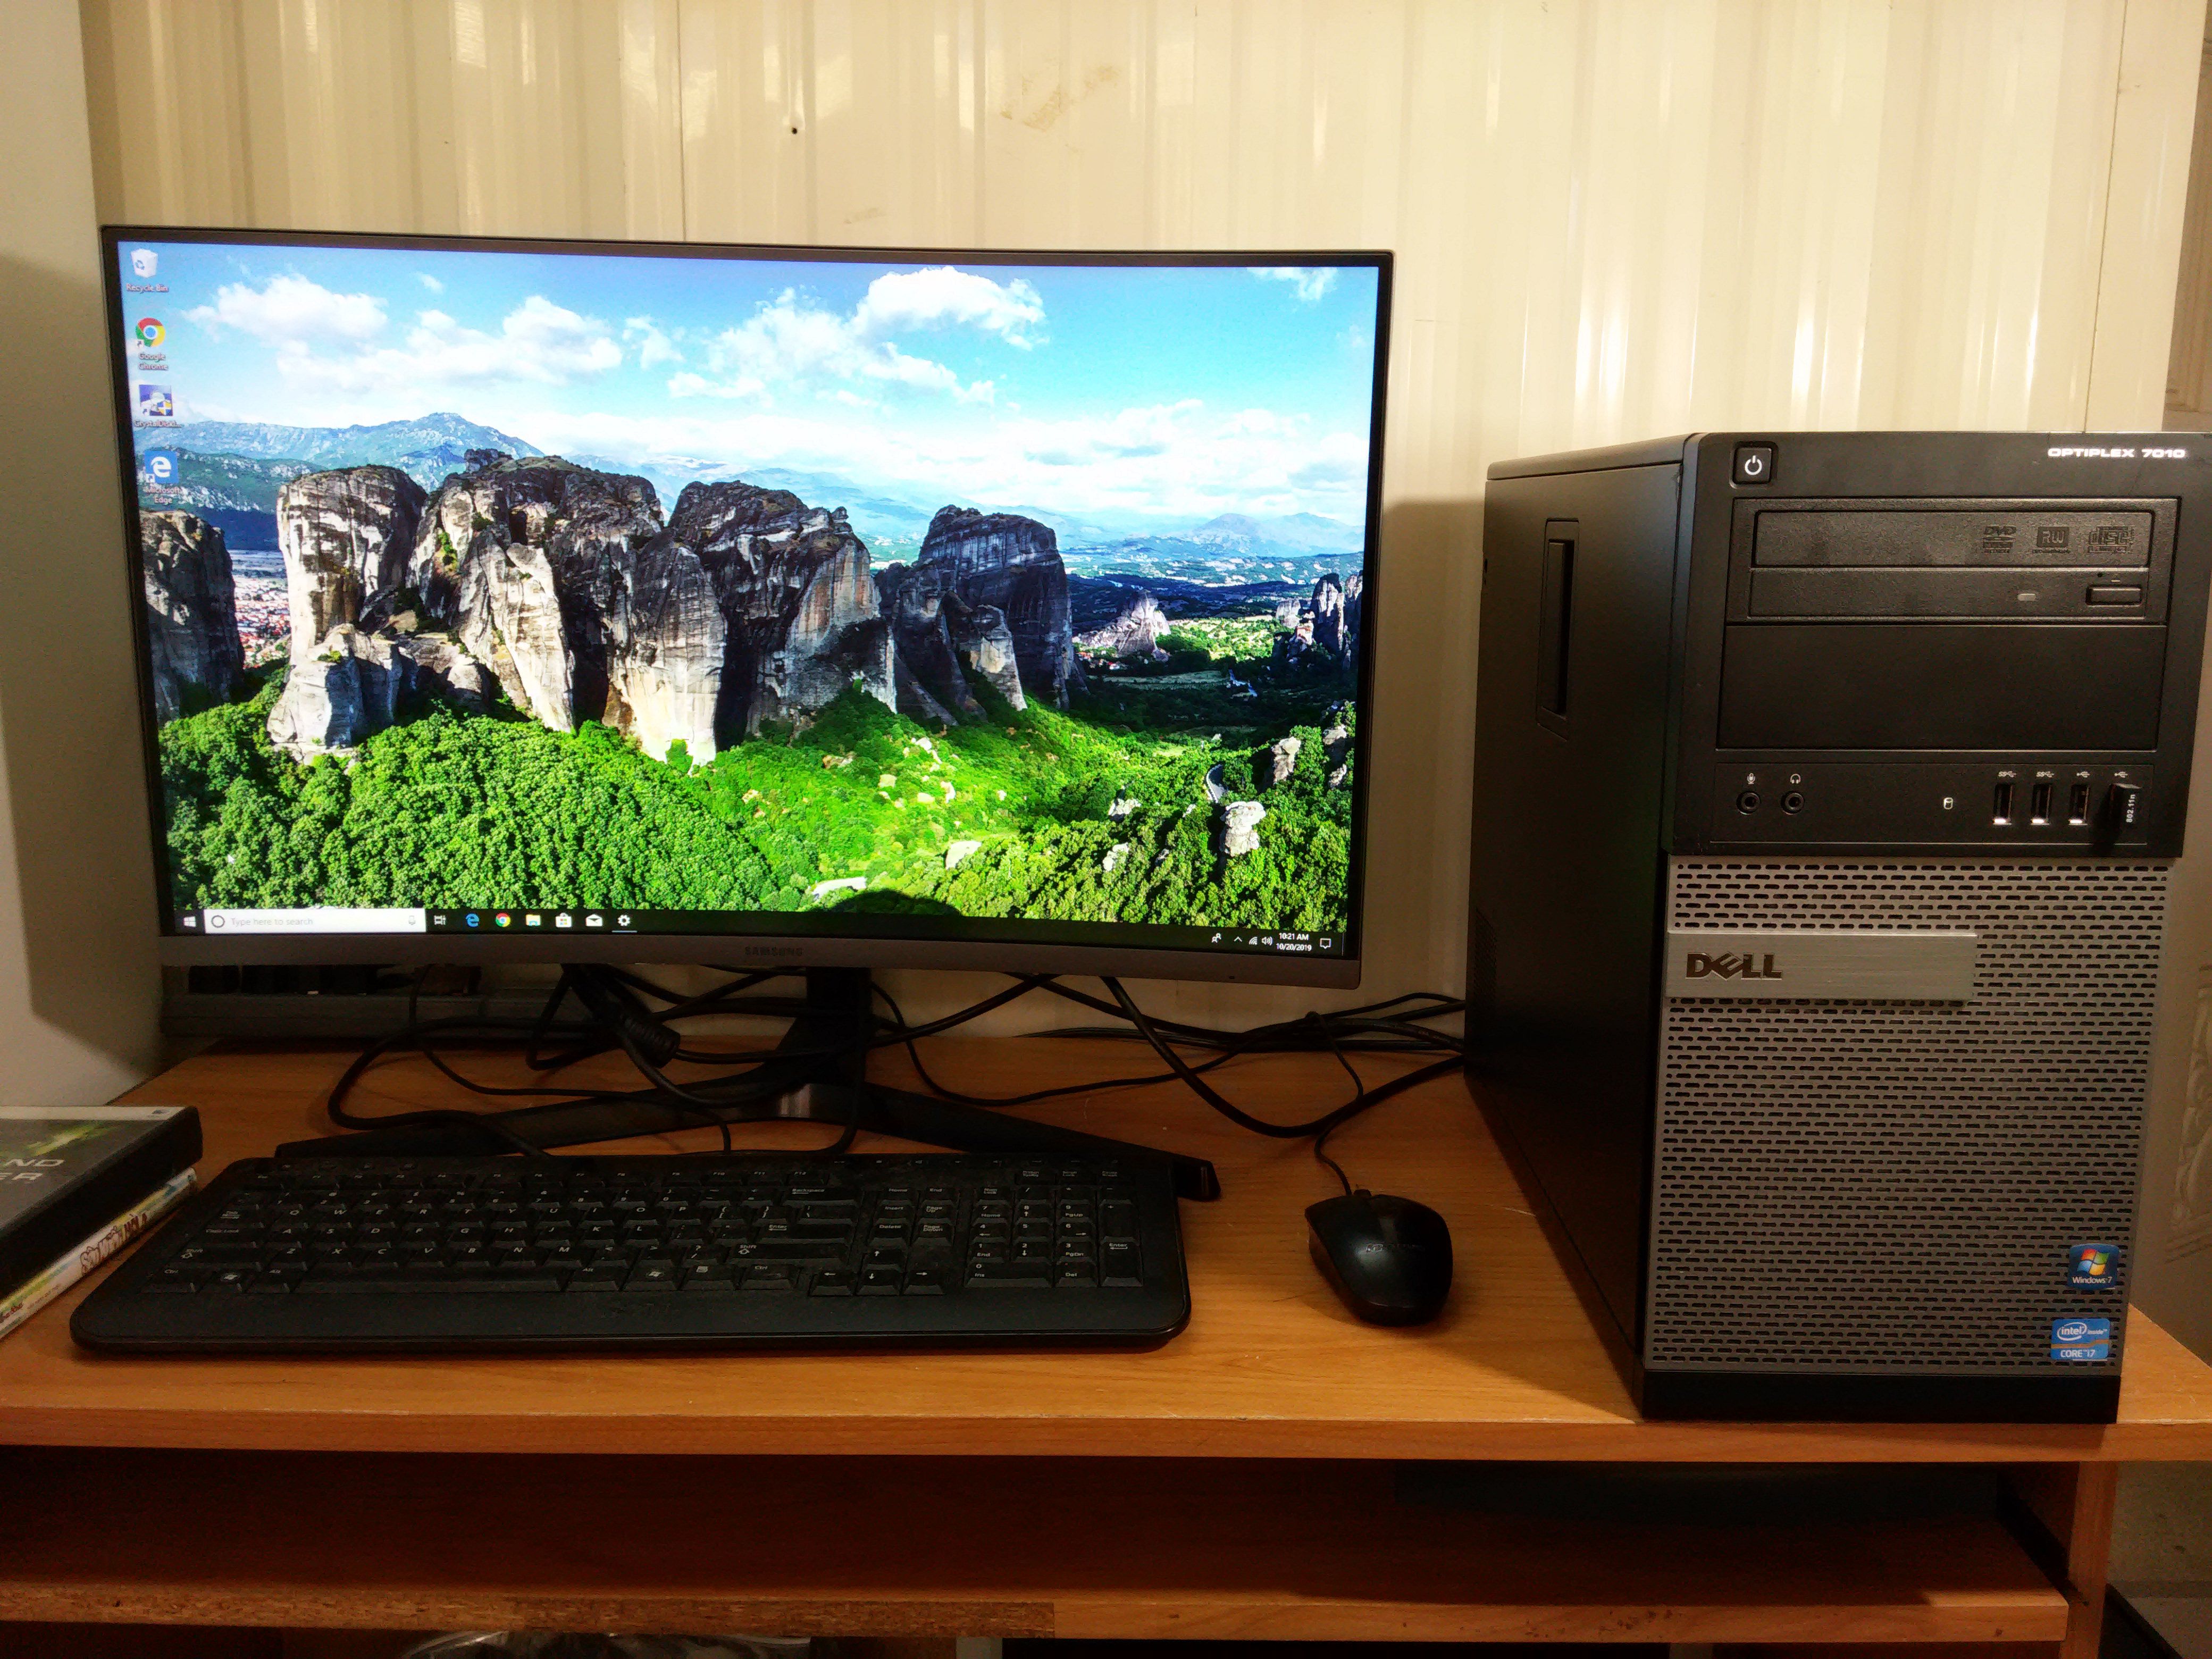 Dell Optiplex 7010 i7 3Gen 3.4G 8G RAM 500G Win10 Pro 27 Samsung curved monitor +mouse and keyboard